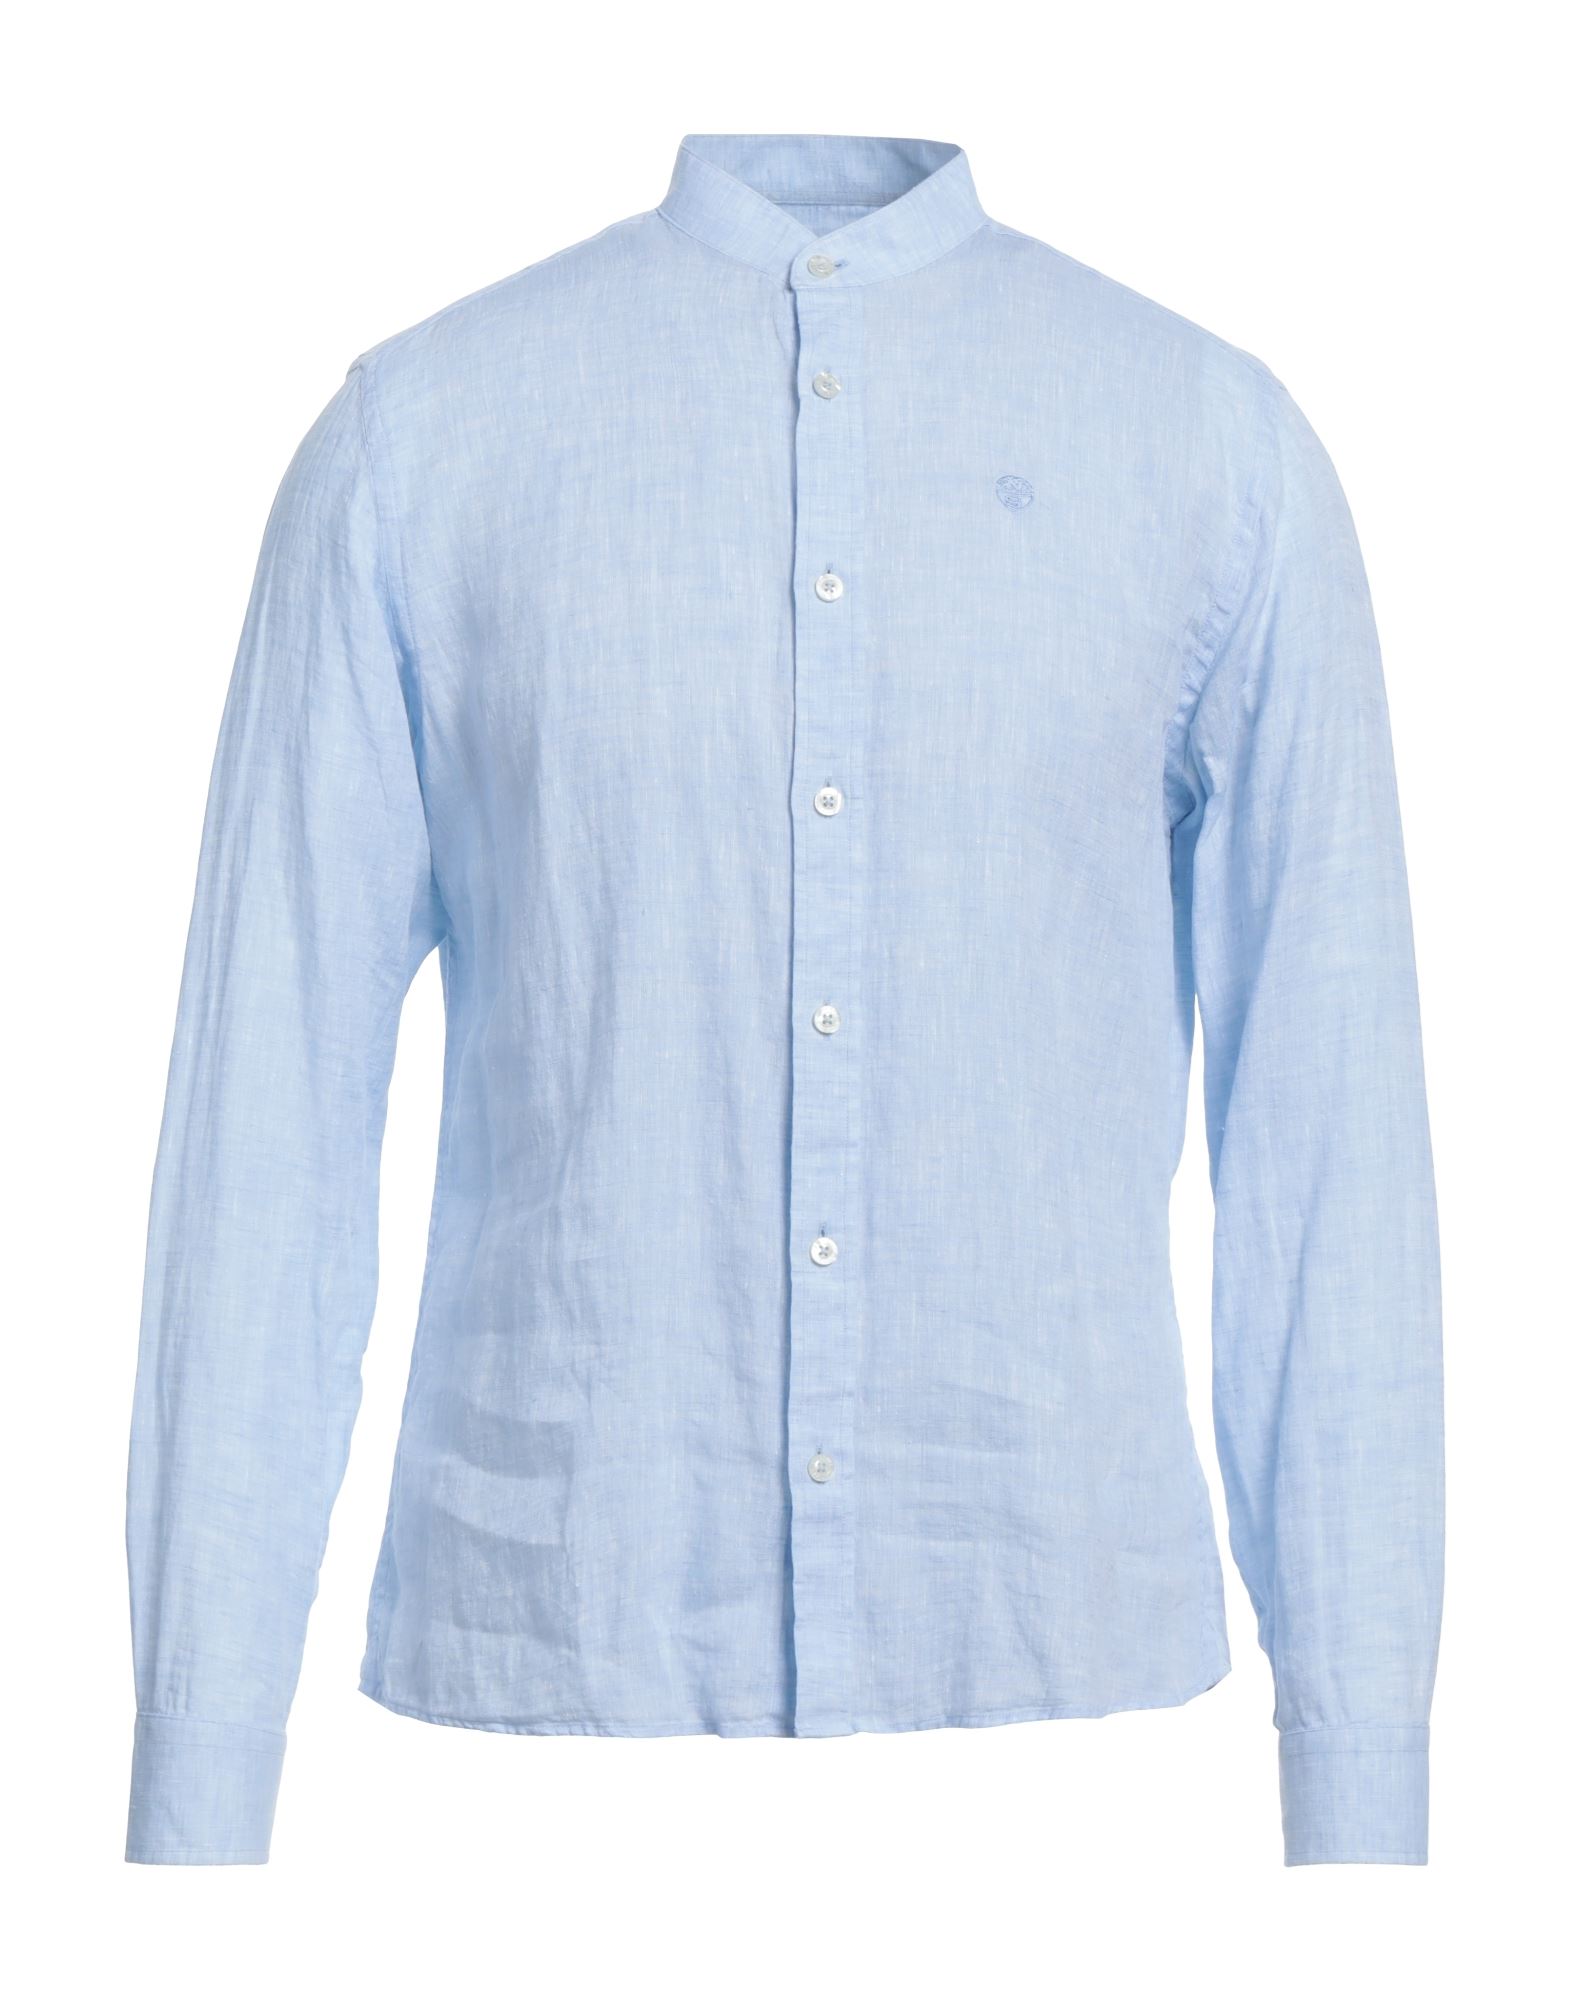 North Sails Shirts In Blue